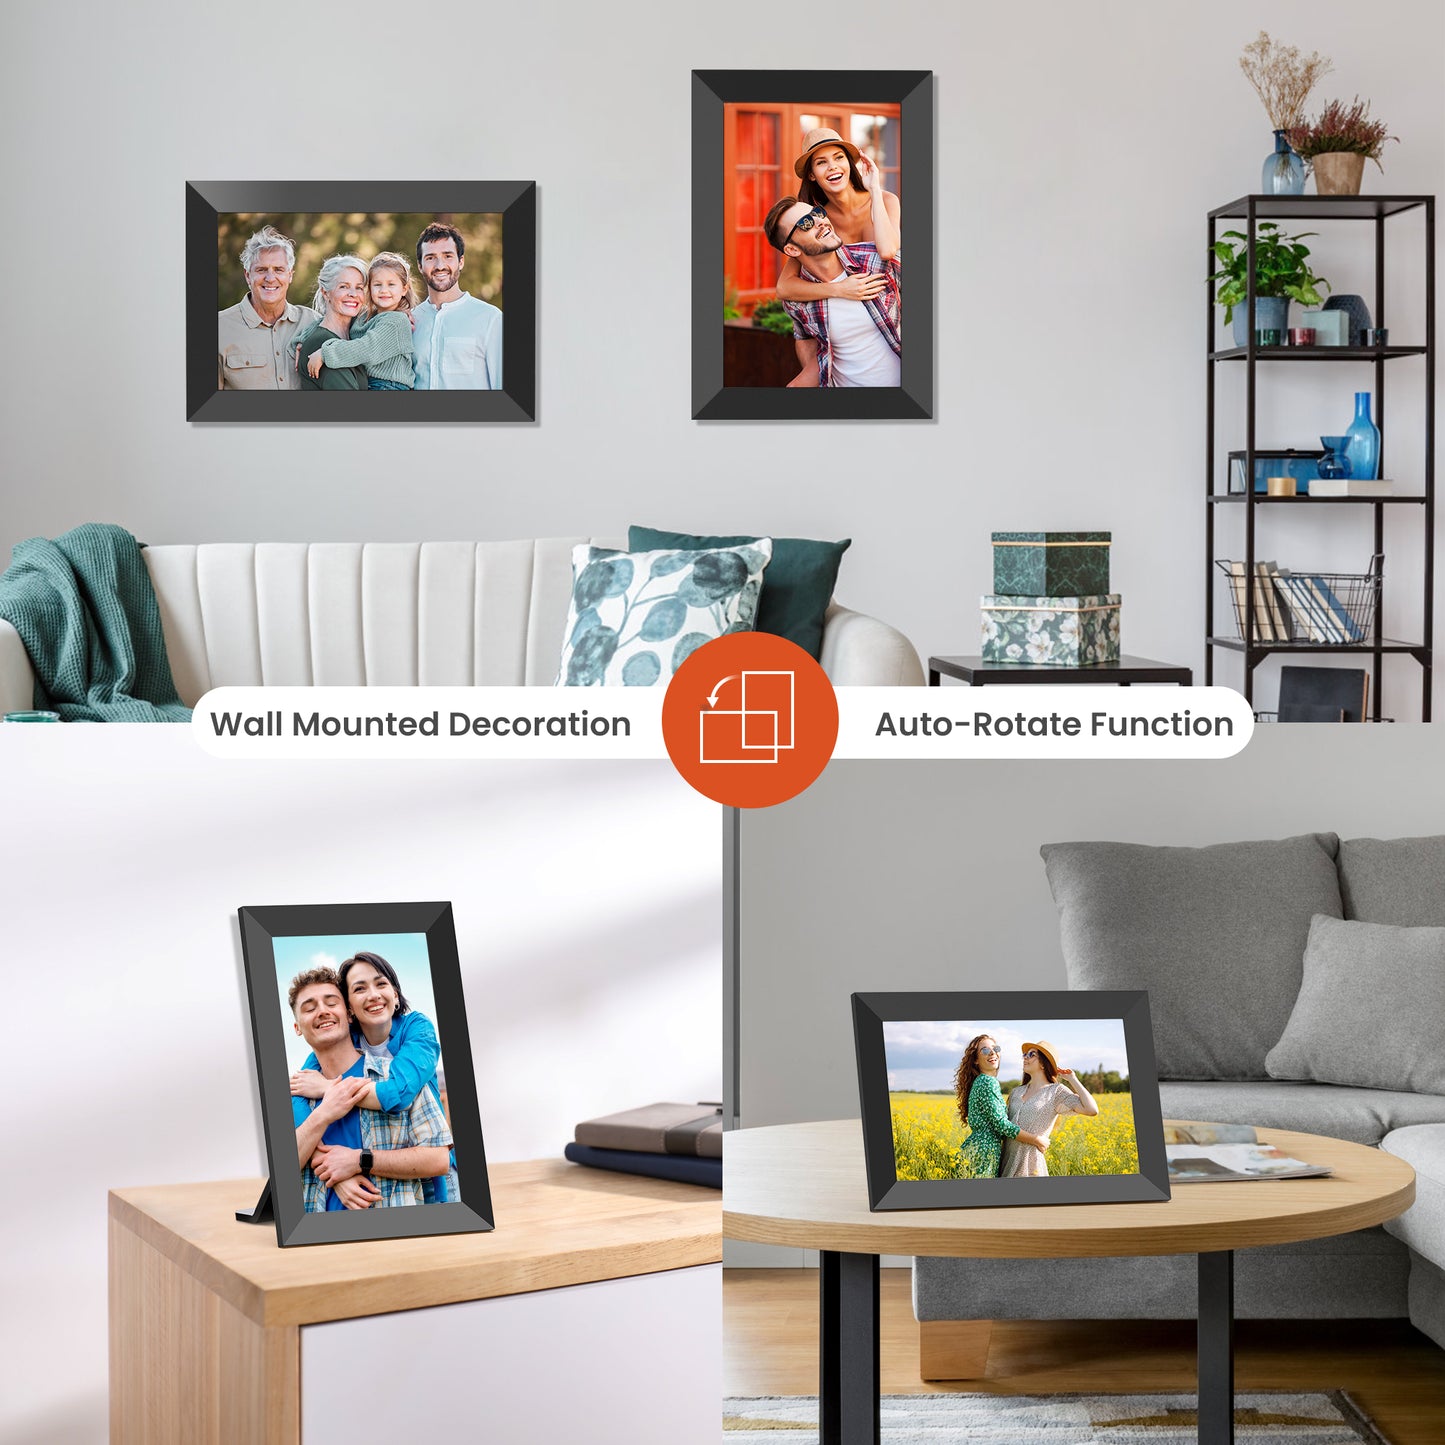 NUSICAN 10.1" WiFi Digital Picture Frame 2 Pack, IPS HD Smart Touch Screen Cloud Electric Photo Frame with 32GB Storage, SlideShow, Auto-Rotate, Share Photos & Videos instantly, Best Gift choices!